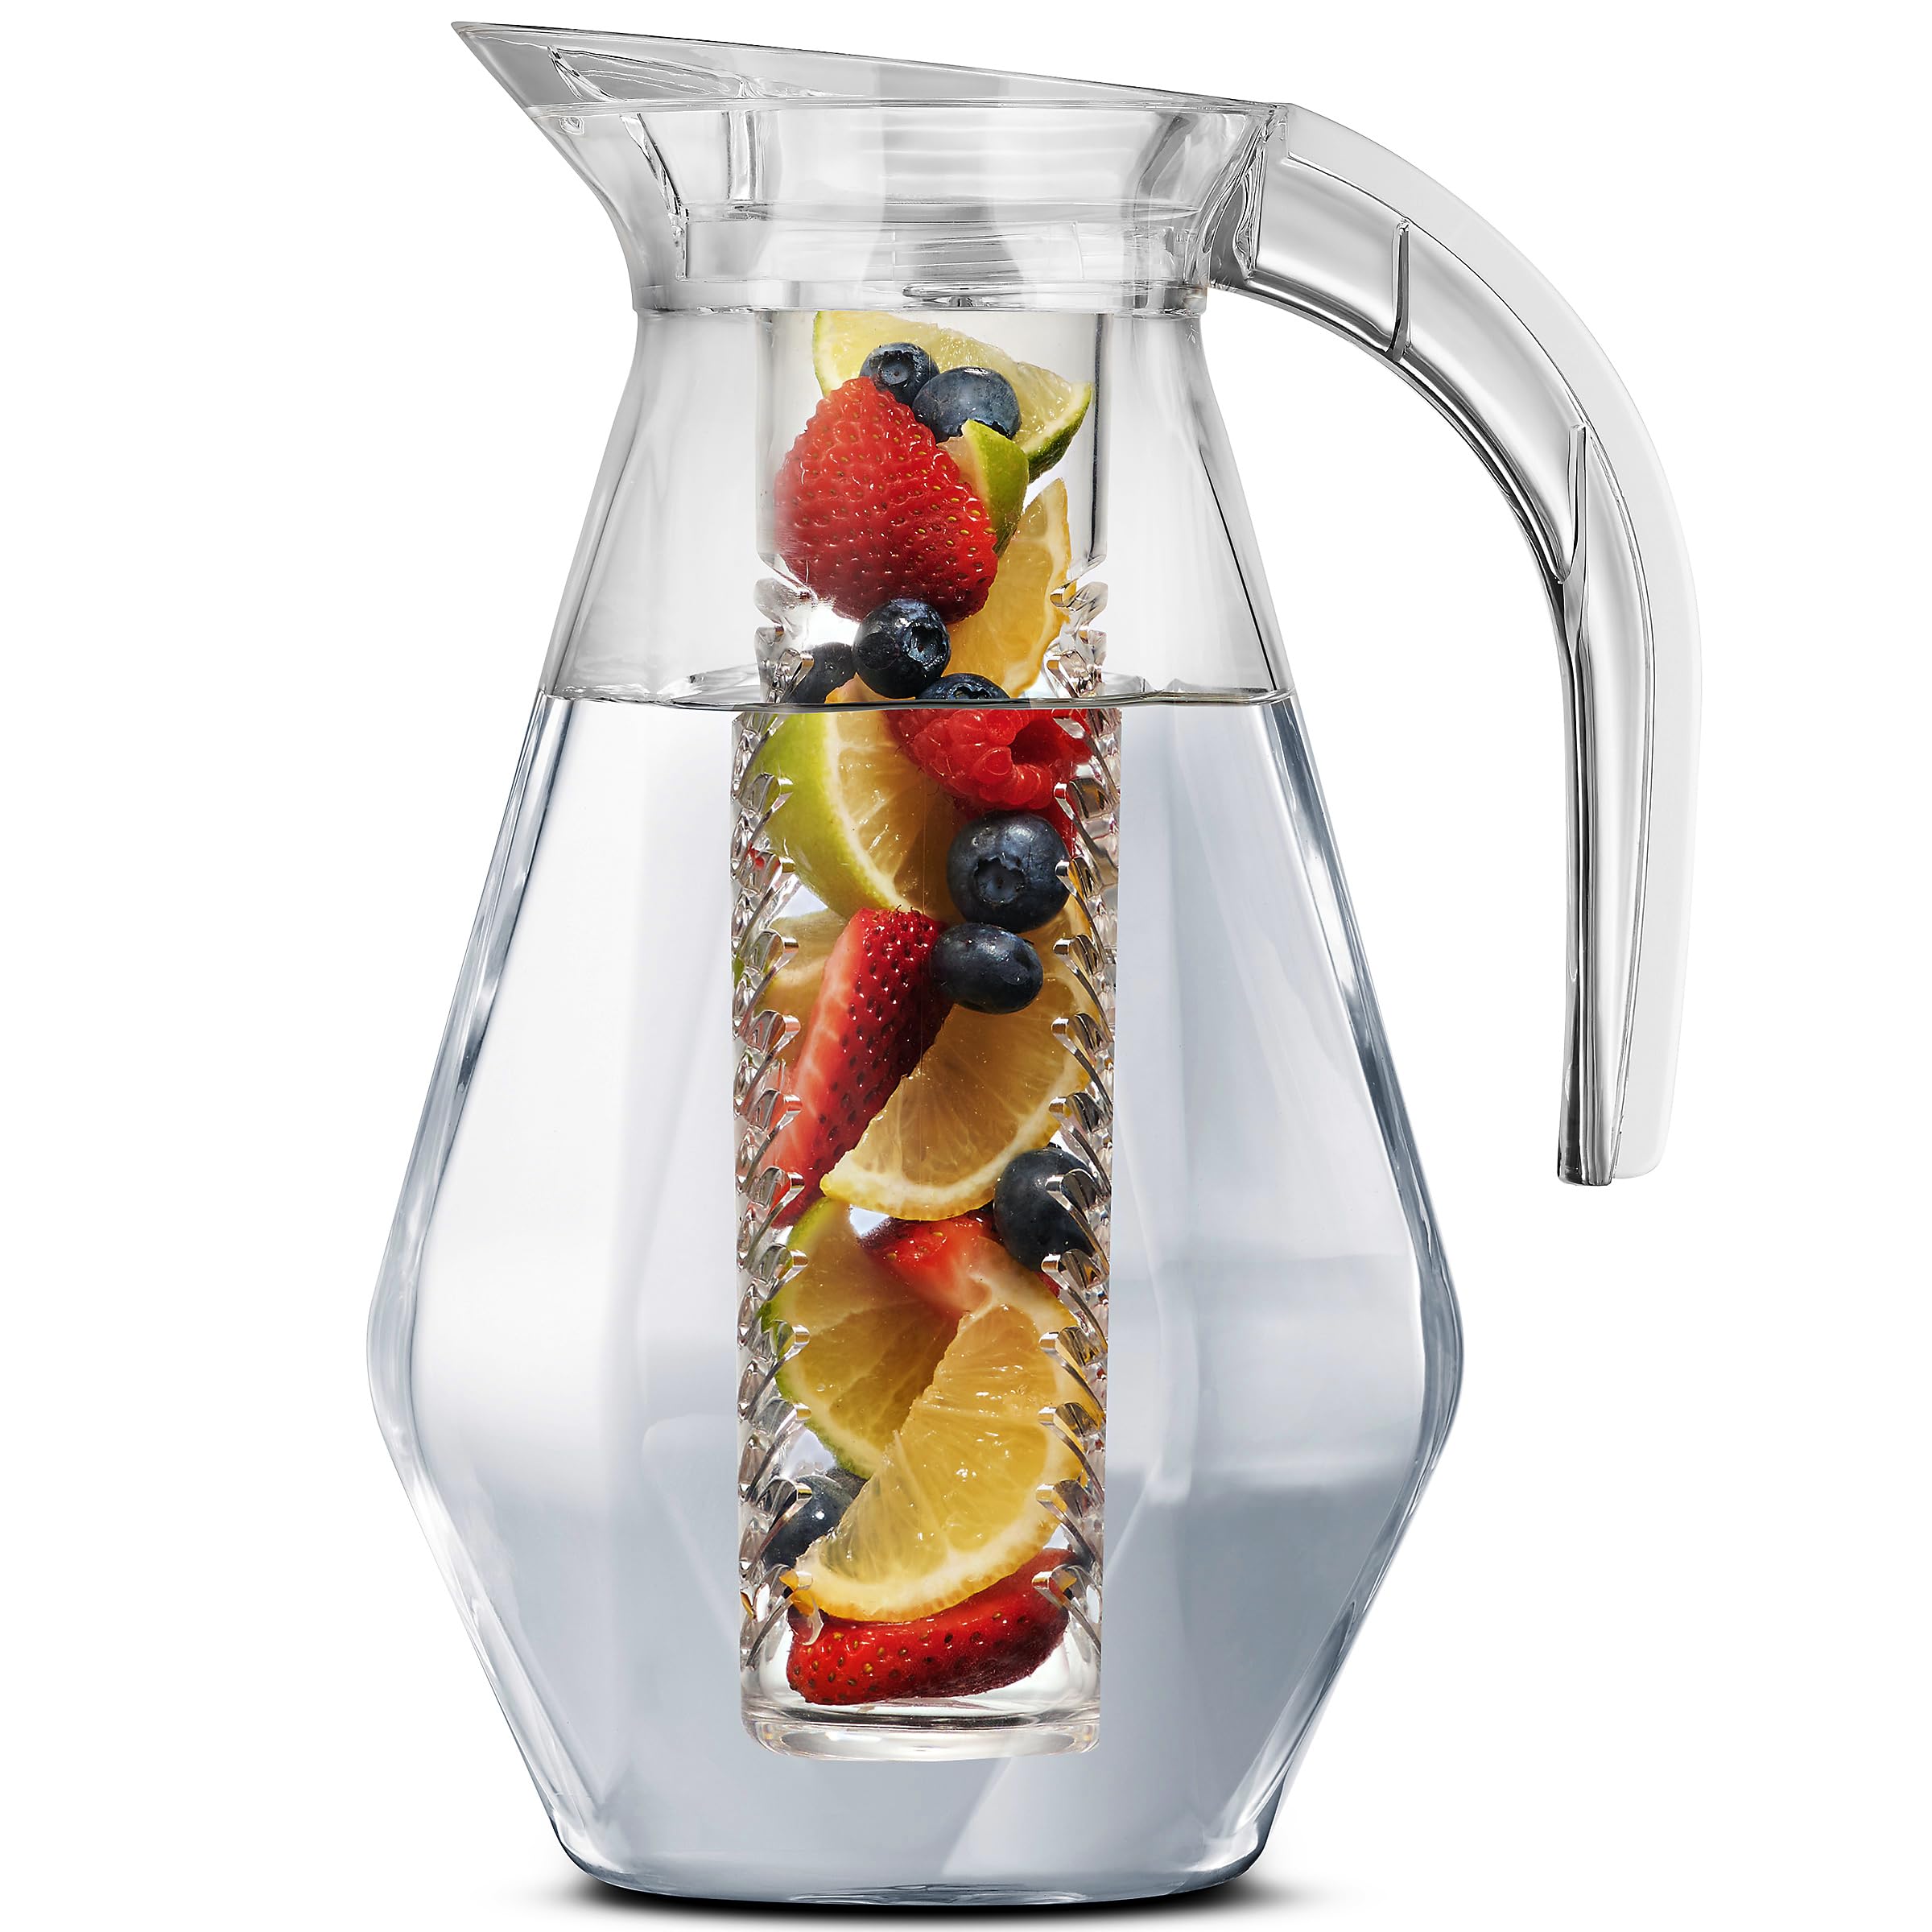 MosJos Acrylic Pitcher (72 oz), Clear Plastic, Water Pitcher with Lid, Shatterproof, BPA-Free Clear Pitcher, Ideal for Sangria, Lemonade, Juice, Iced Tea & More (Infuser- Acrylic Pitcher)  - Like New